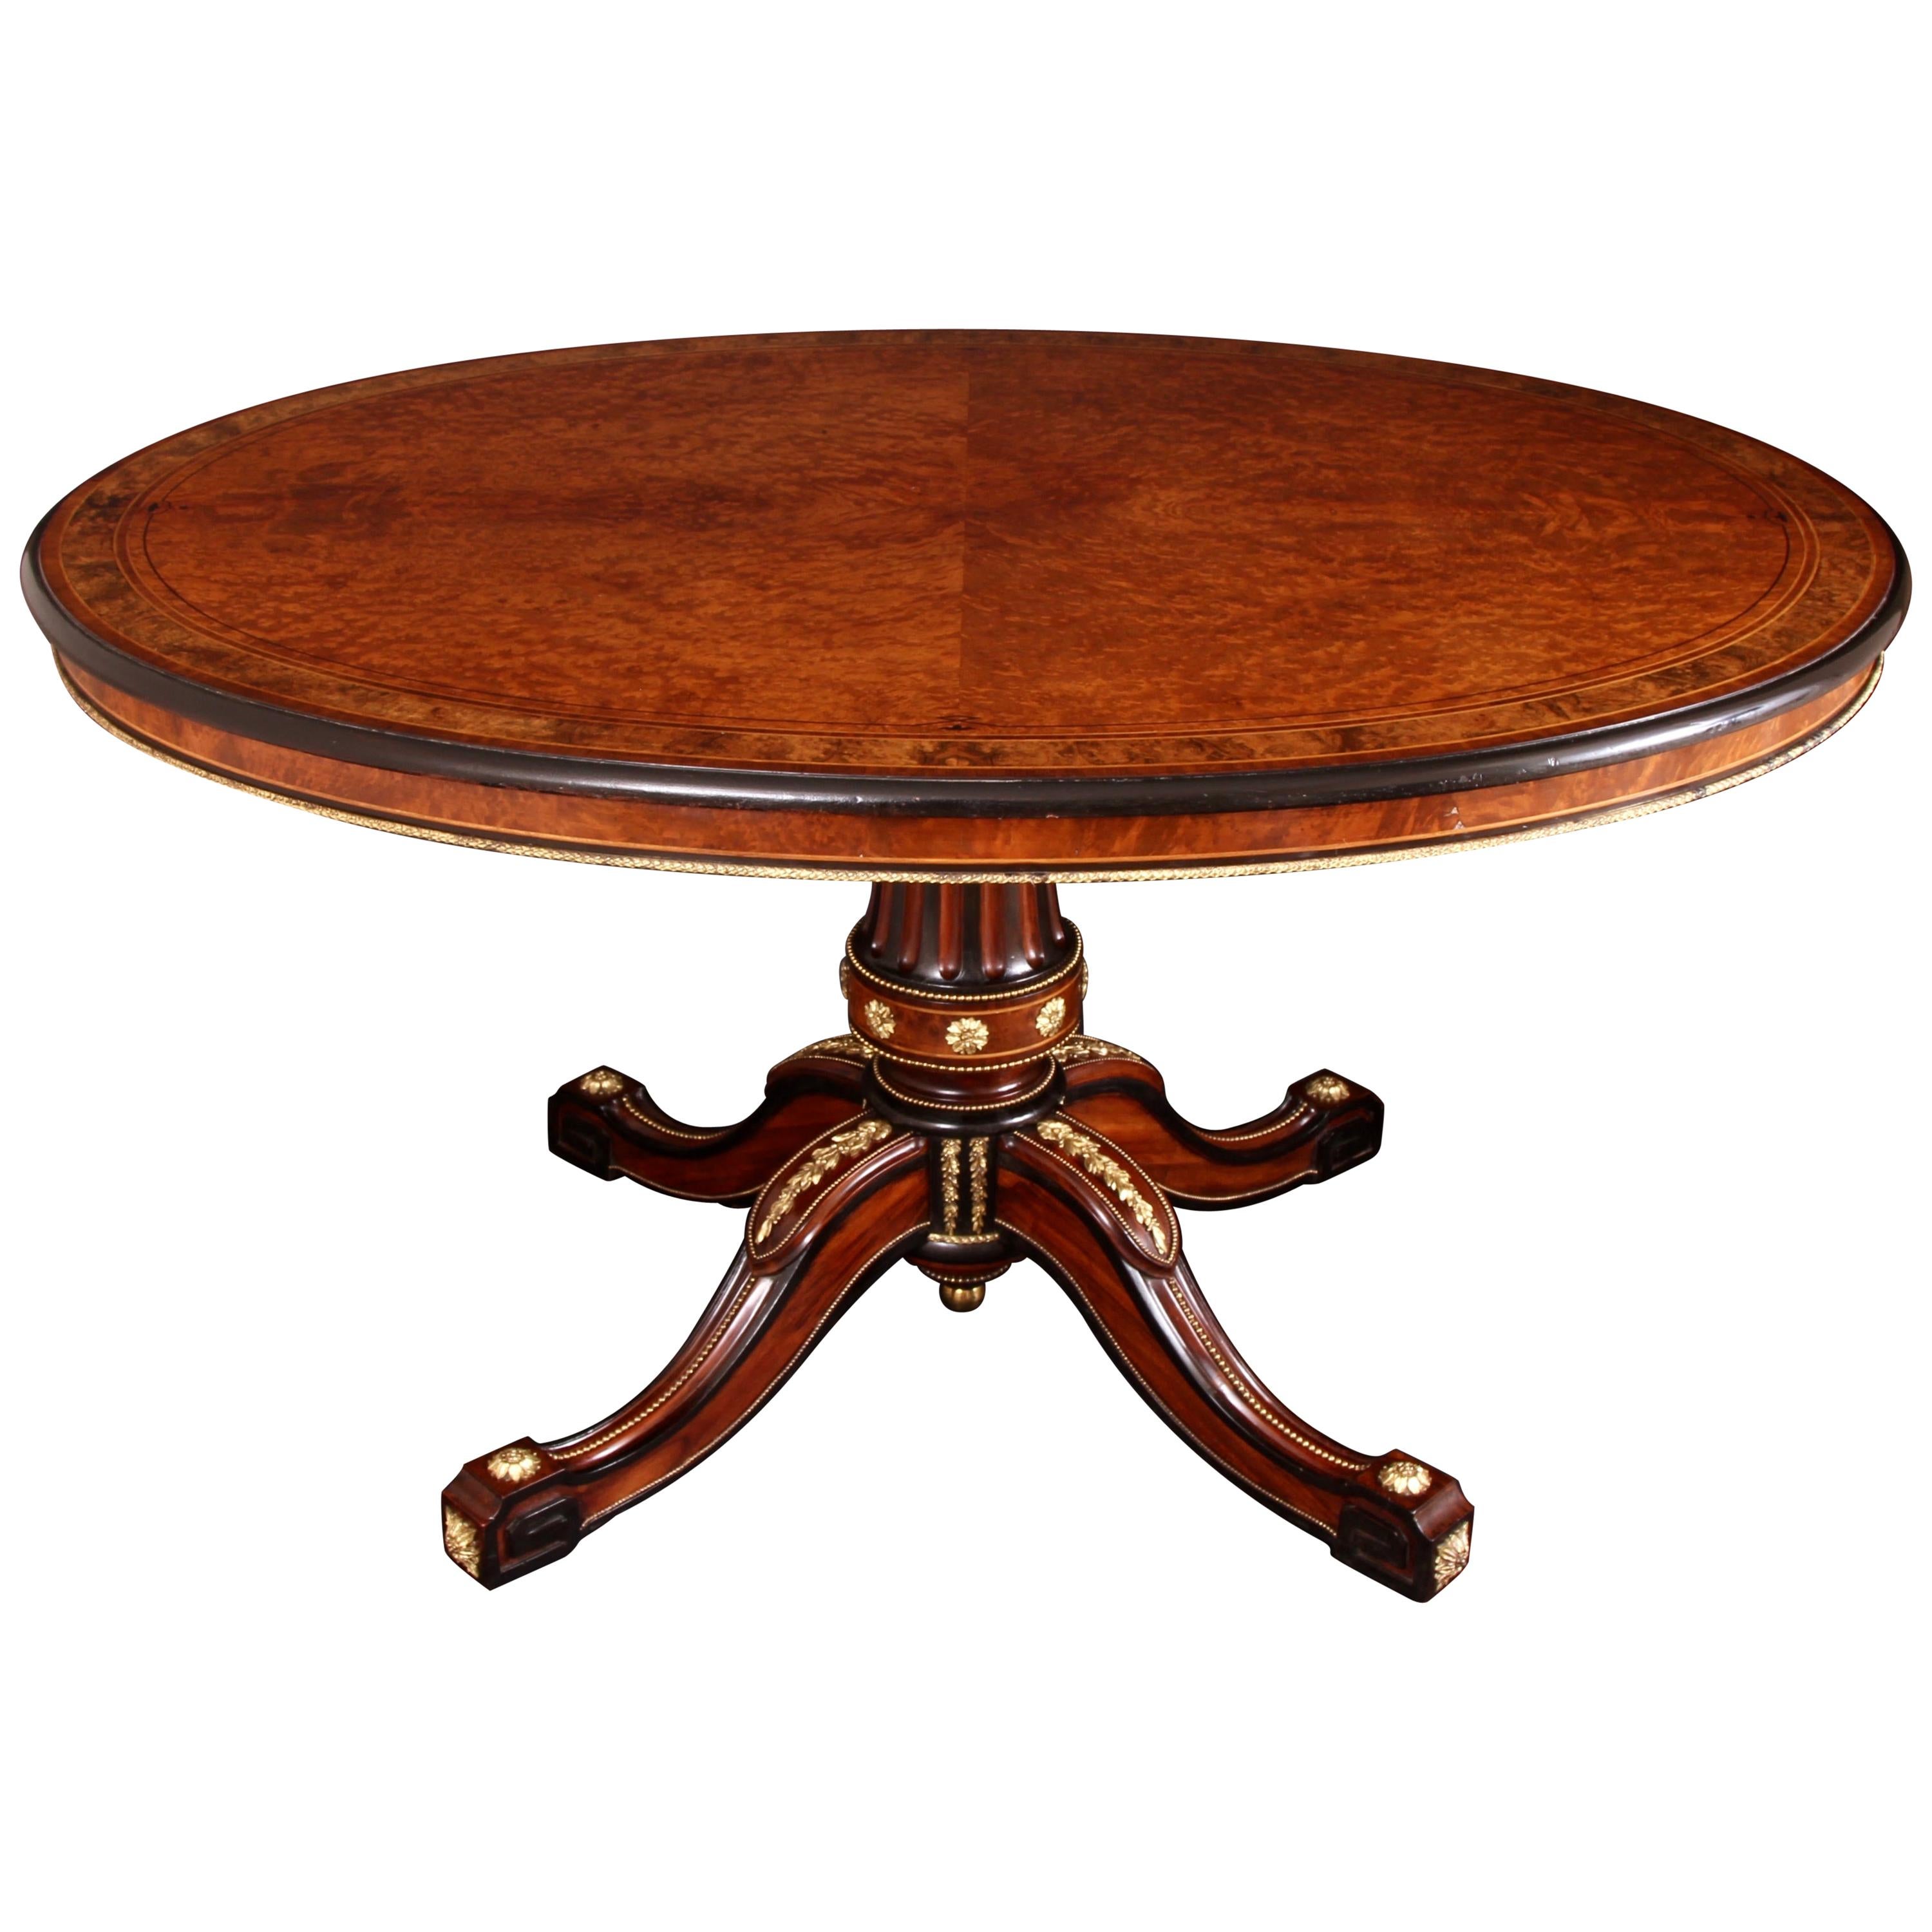 Exceptional 19th Century Centre Table Attributed to Holland & Sons